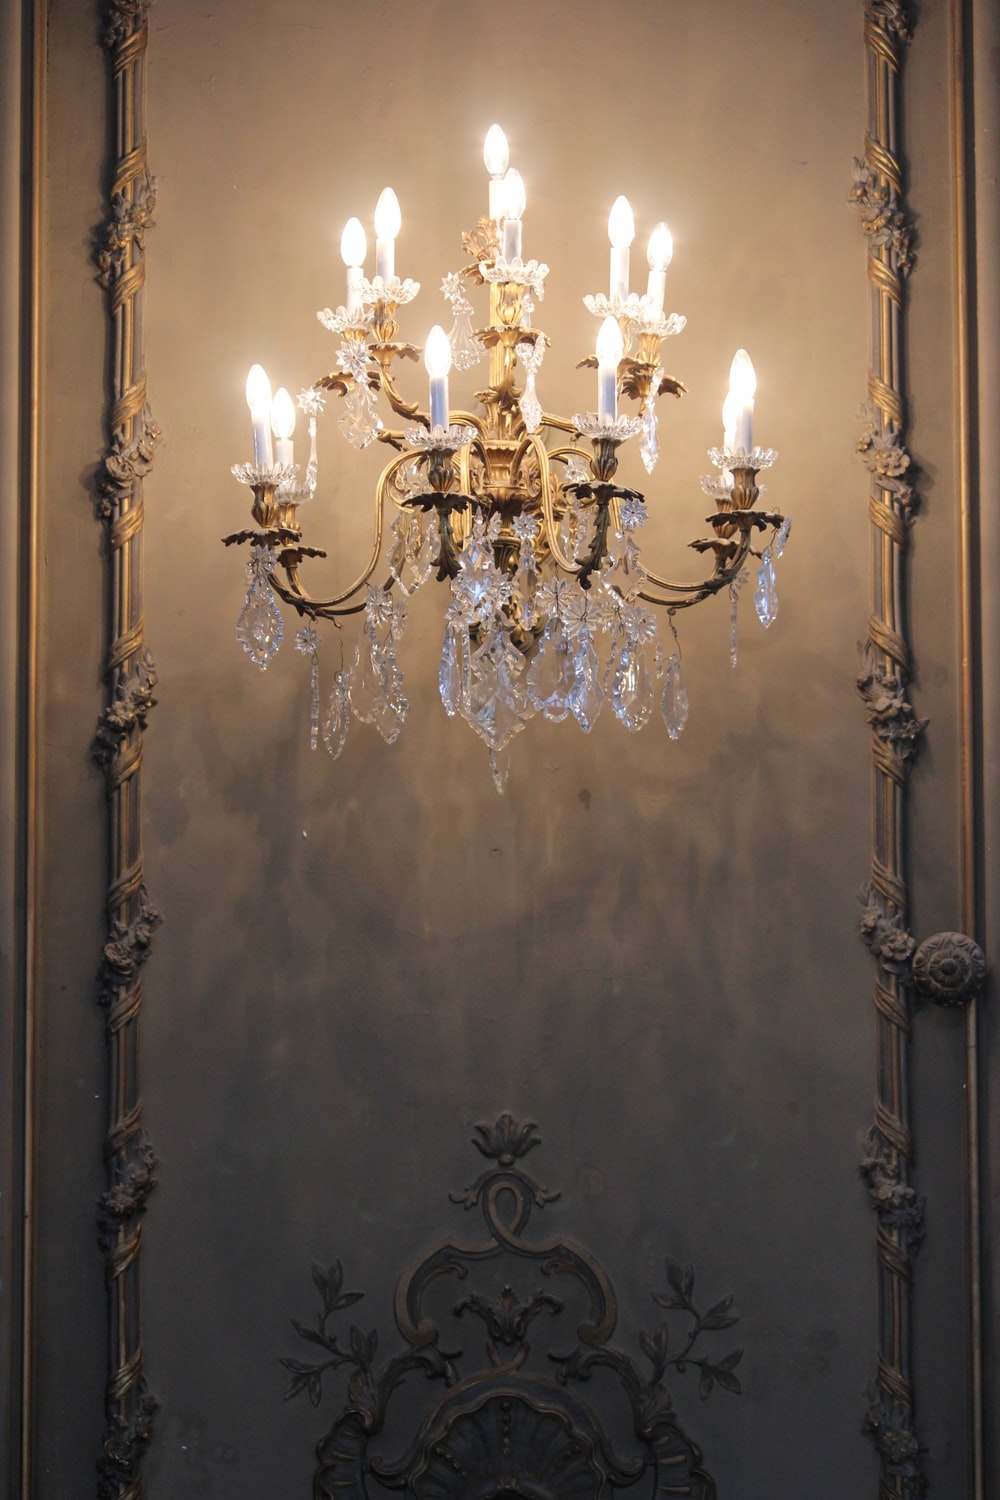 Chandelier Pictures HD Image